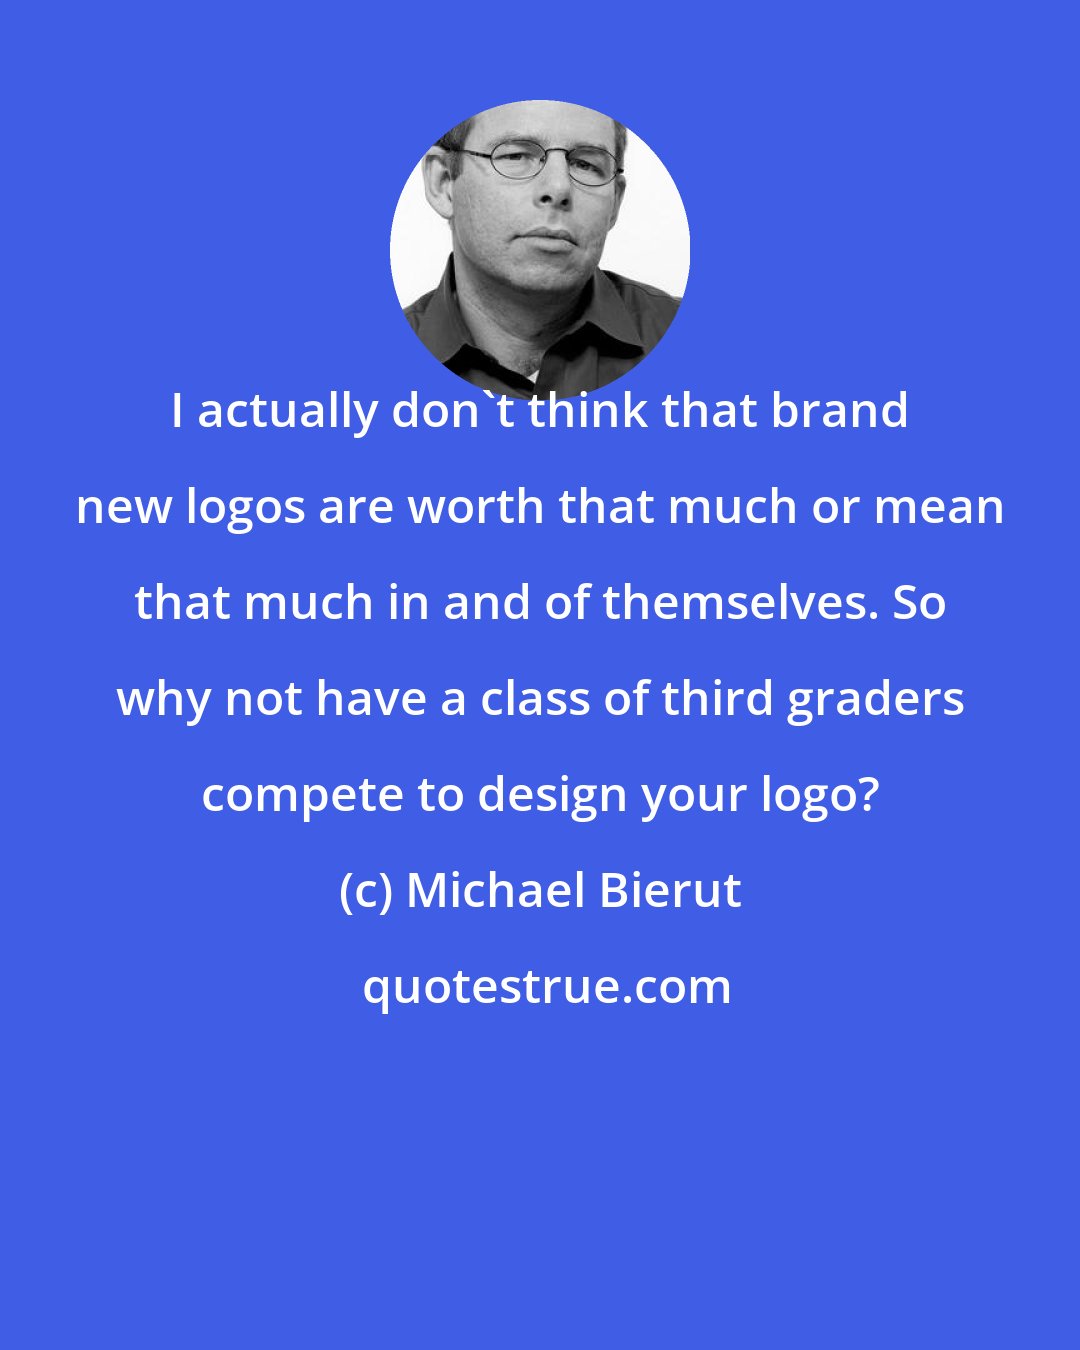 Michael Bierut: I actually don't think that brand new logos are worth that much or mean that much in and of themselves. So why not have a class of third graders compete to design your logo?